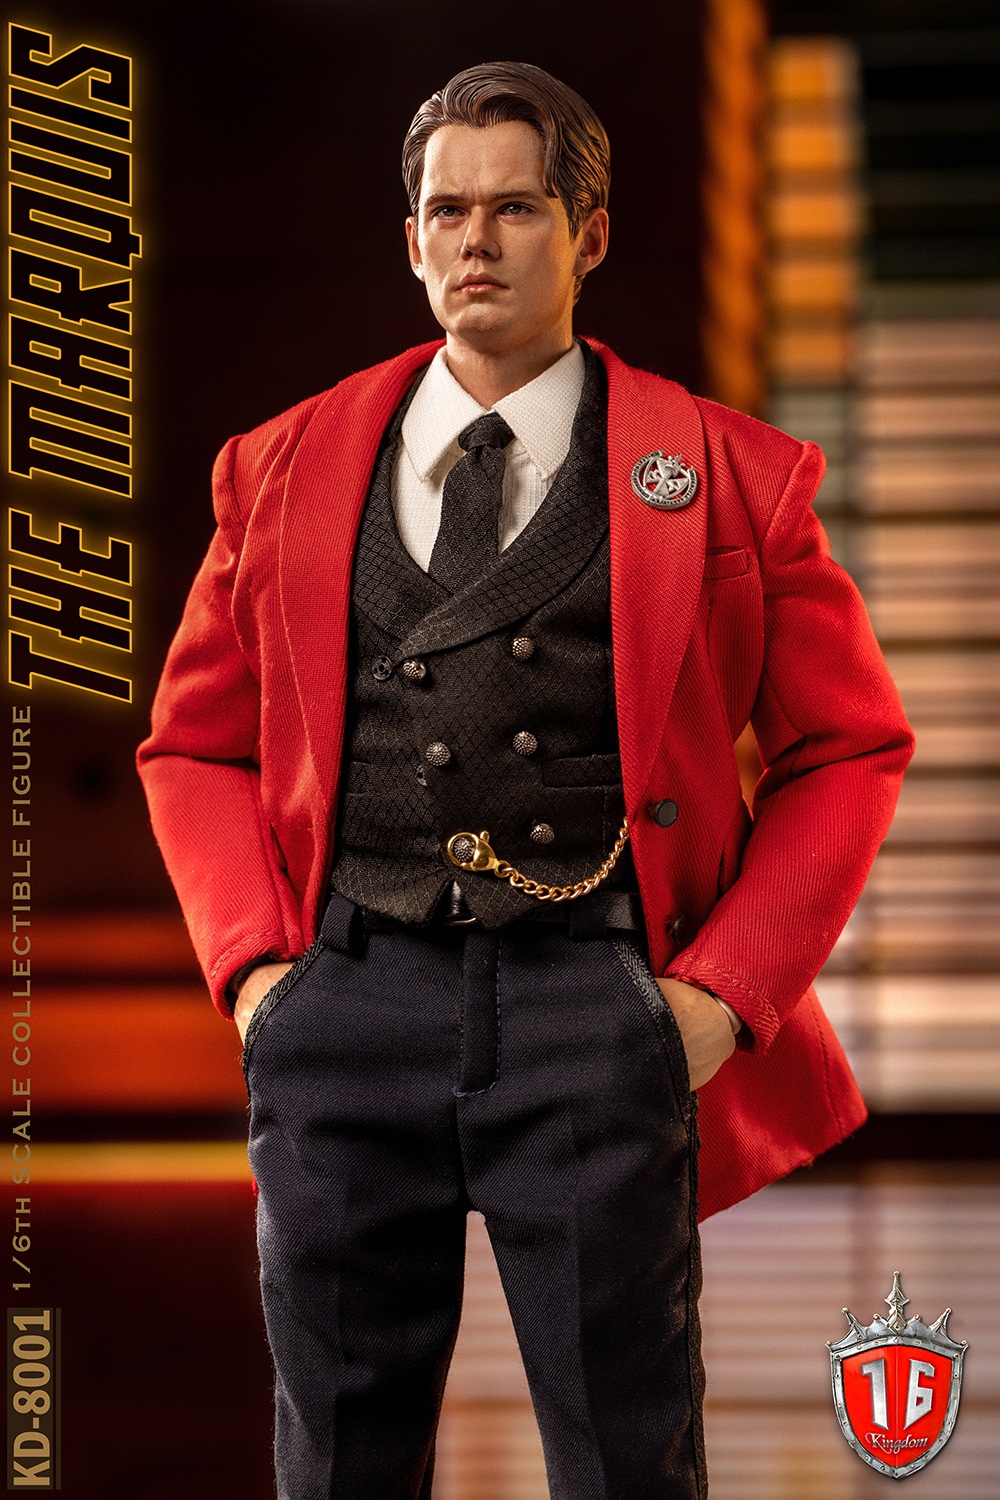 newproduct - NEW PRODUCT: Kingdom: 1/6 The Marquis Action Figure KD-8001 11390912